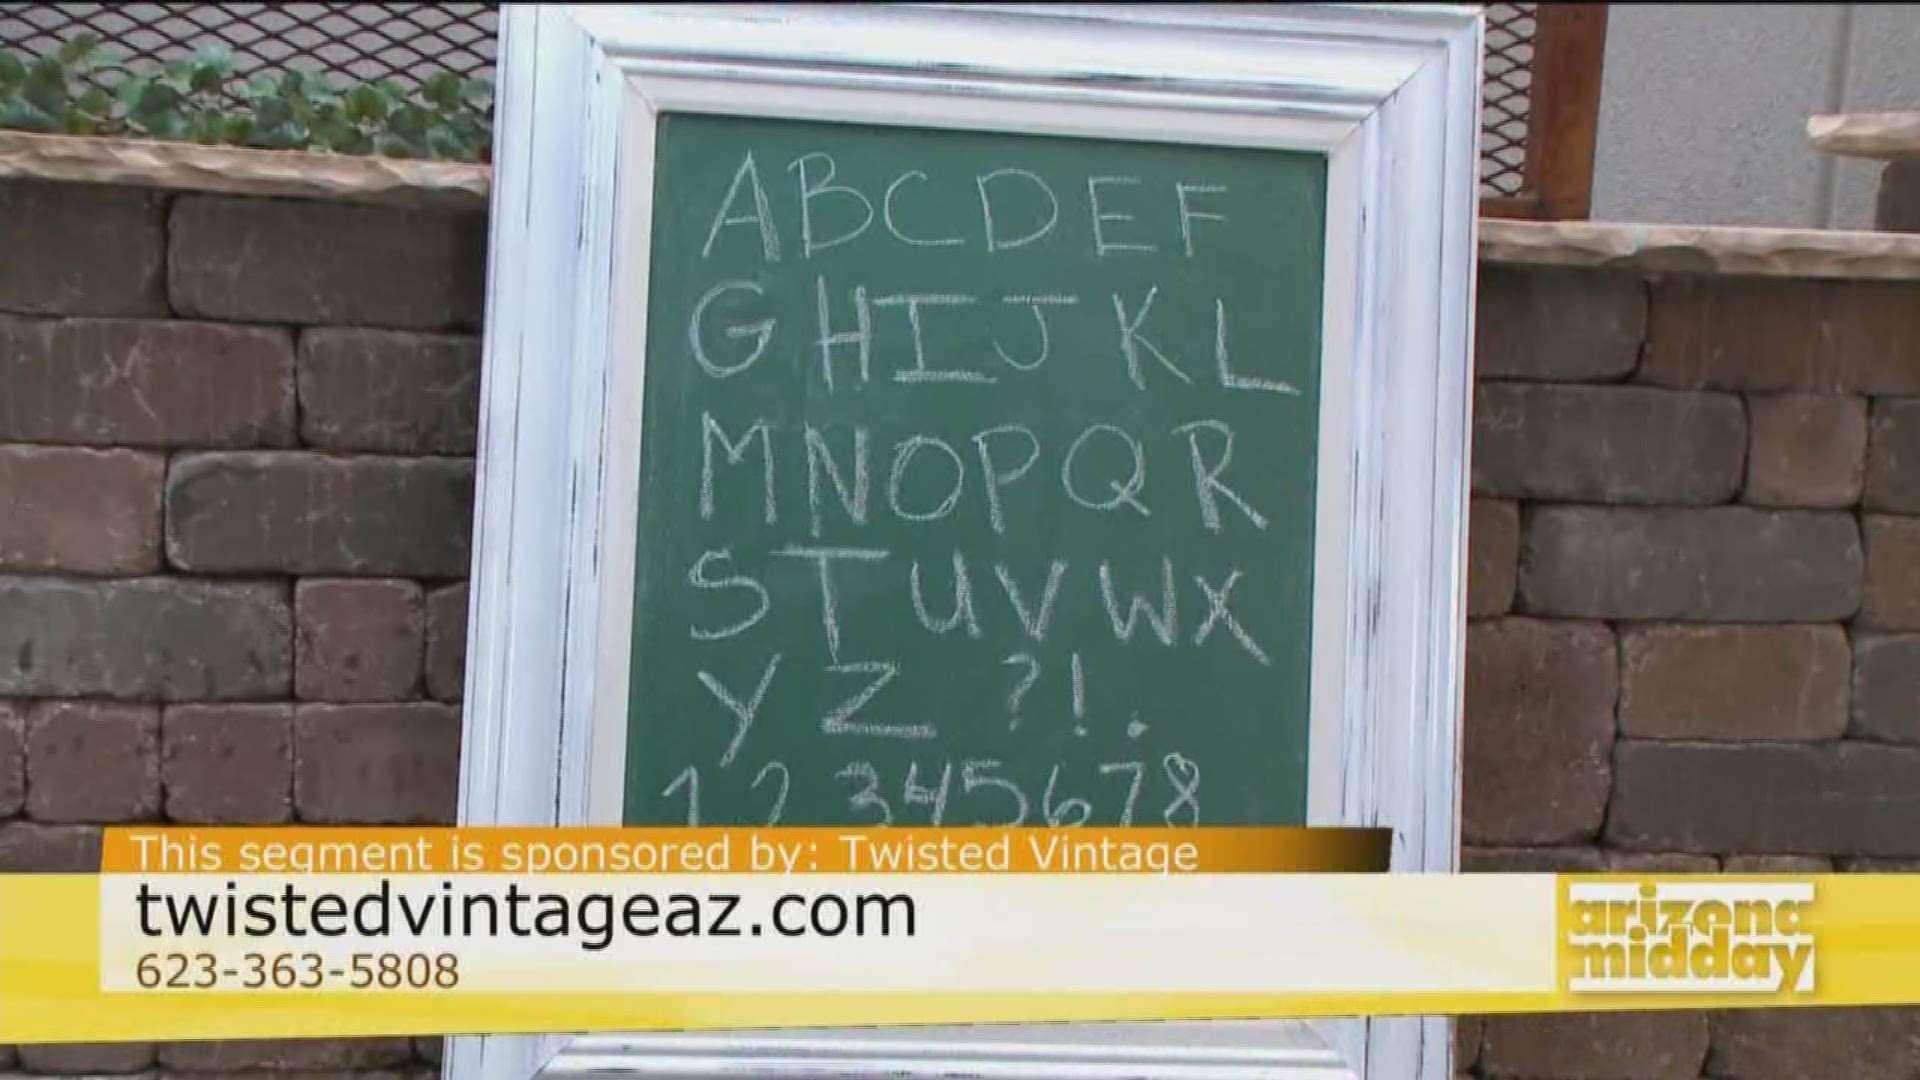 Jessica Ederer from Twisted Vintage shows us how we can make cute chalkboards with a few simple items